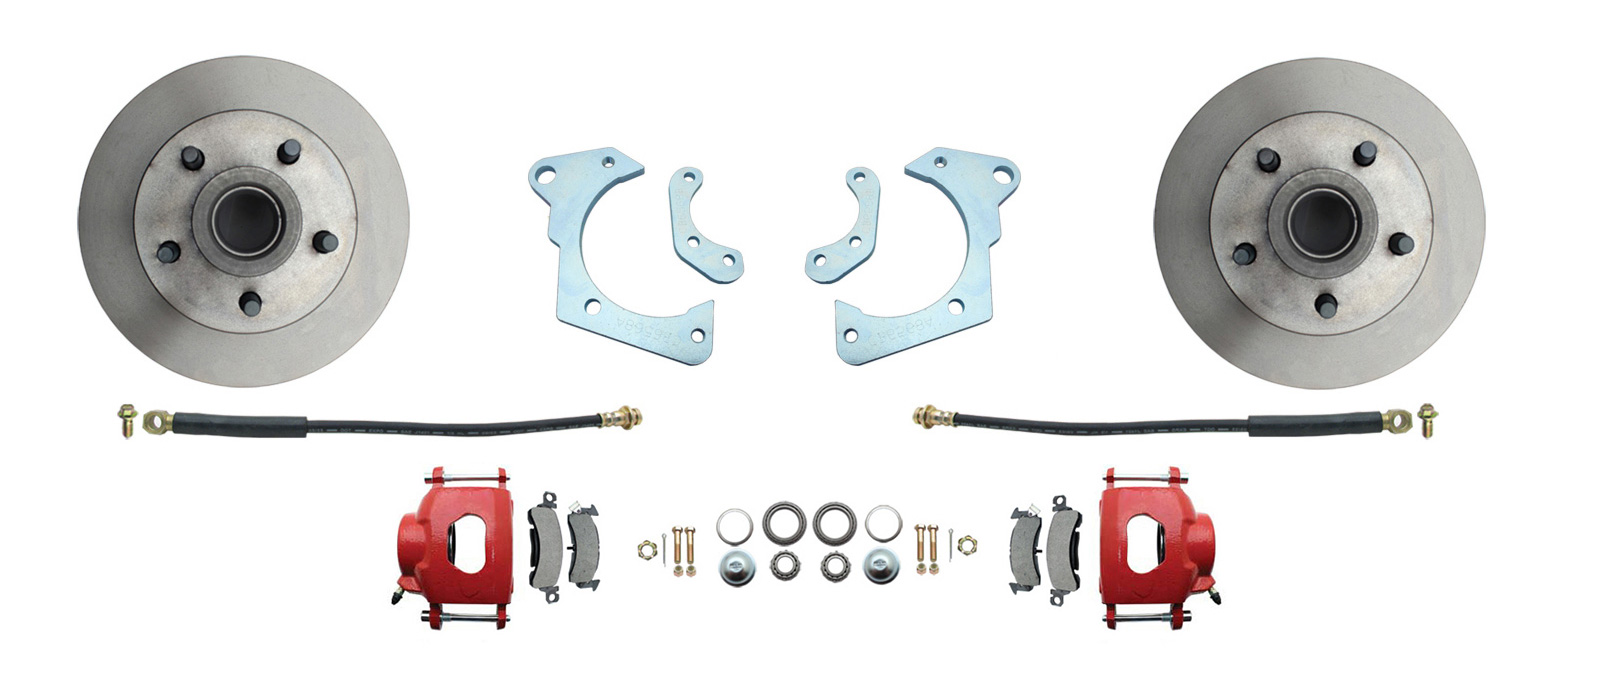 1959-1964 Full Size Chevy Complete Disc Brake Conversion Kit W/ Powder Coated Red Calipers